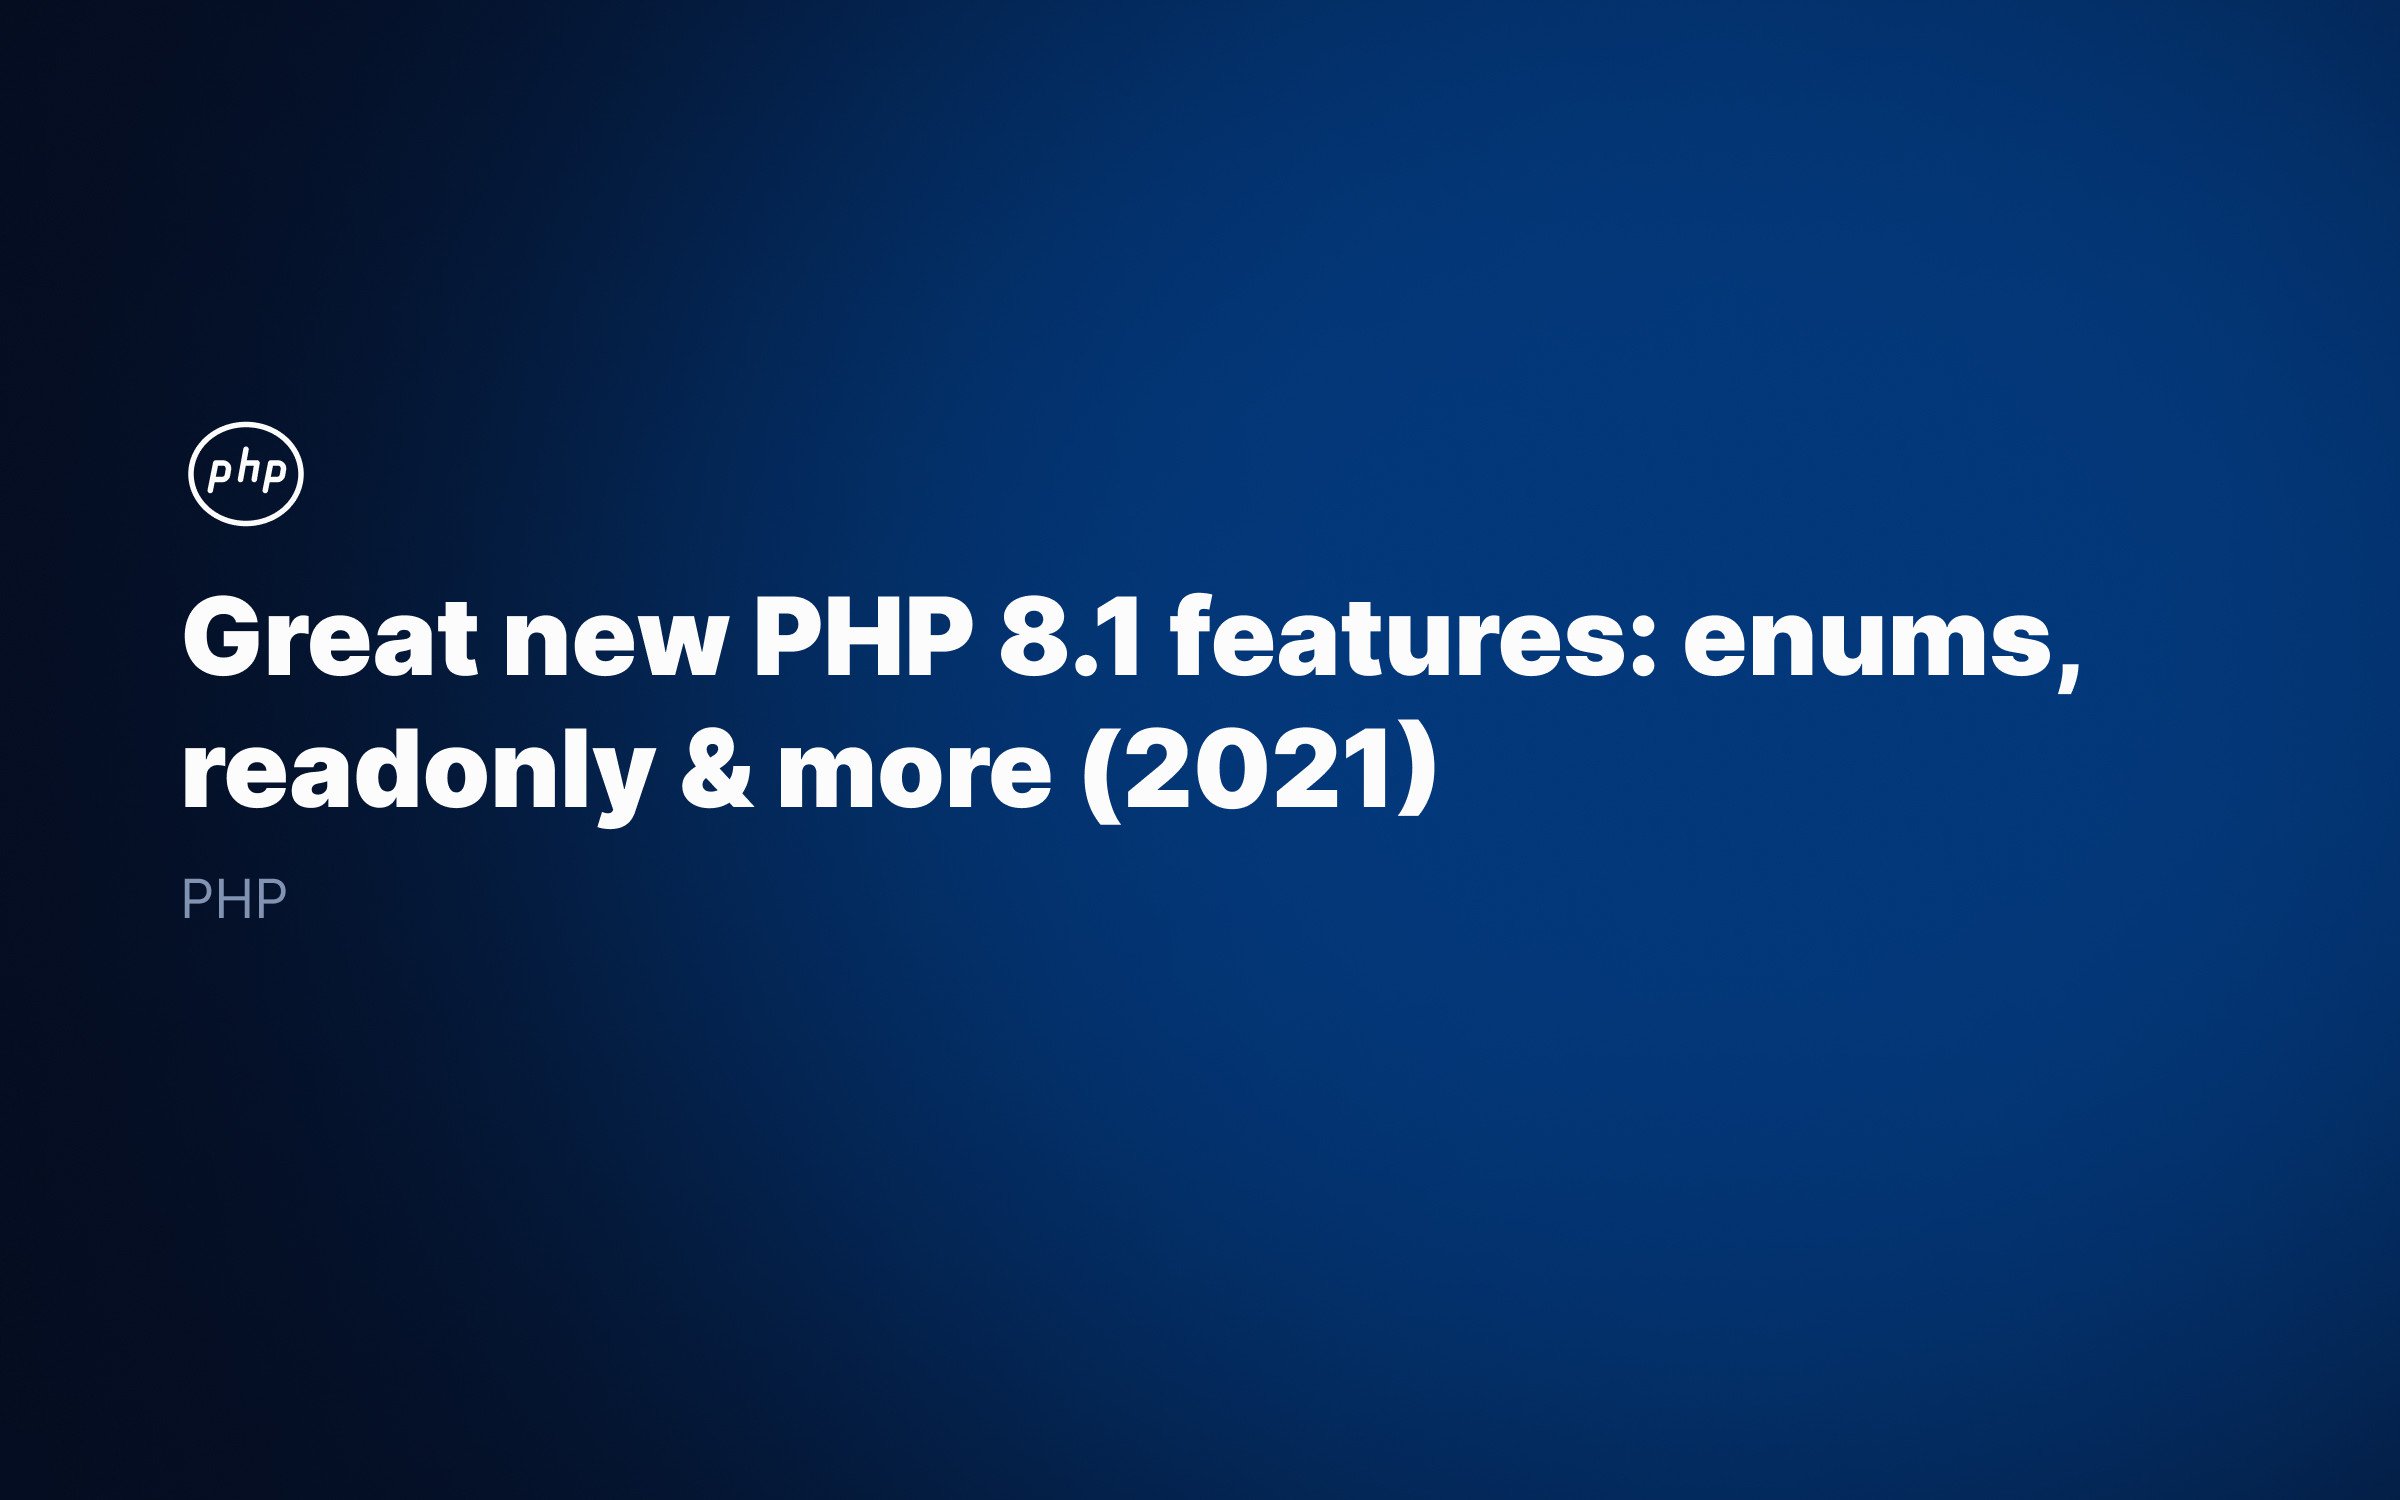 Great new PHP 8.1 features: enums, readonly & more (2021)